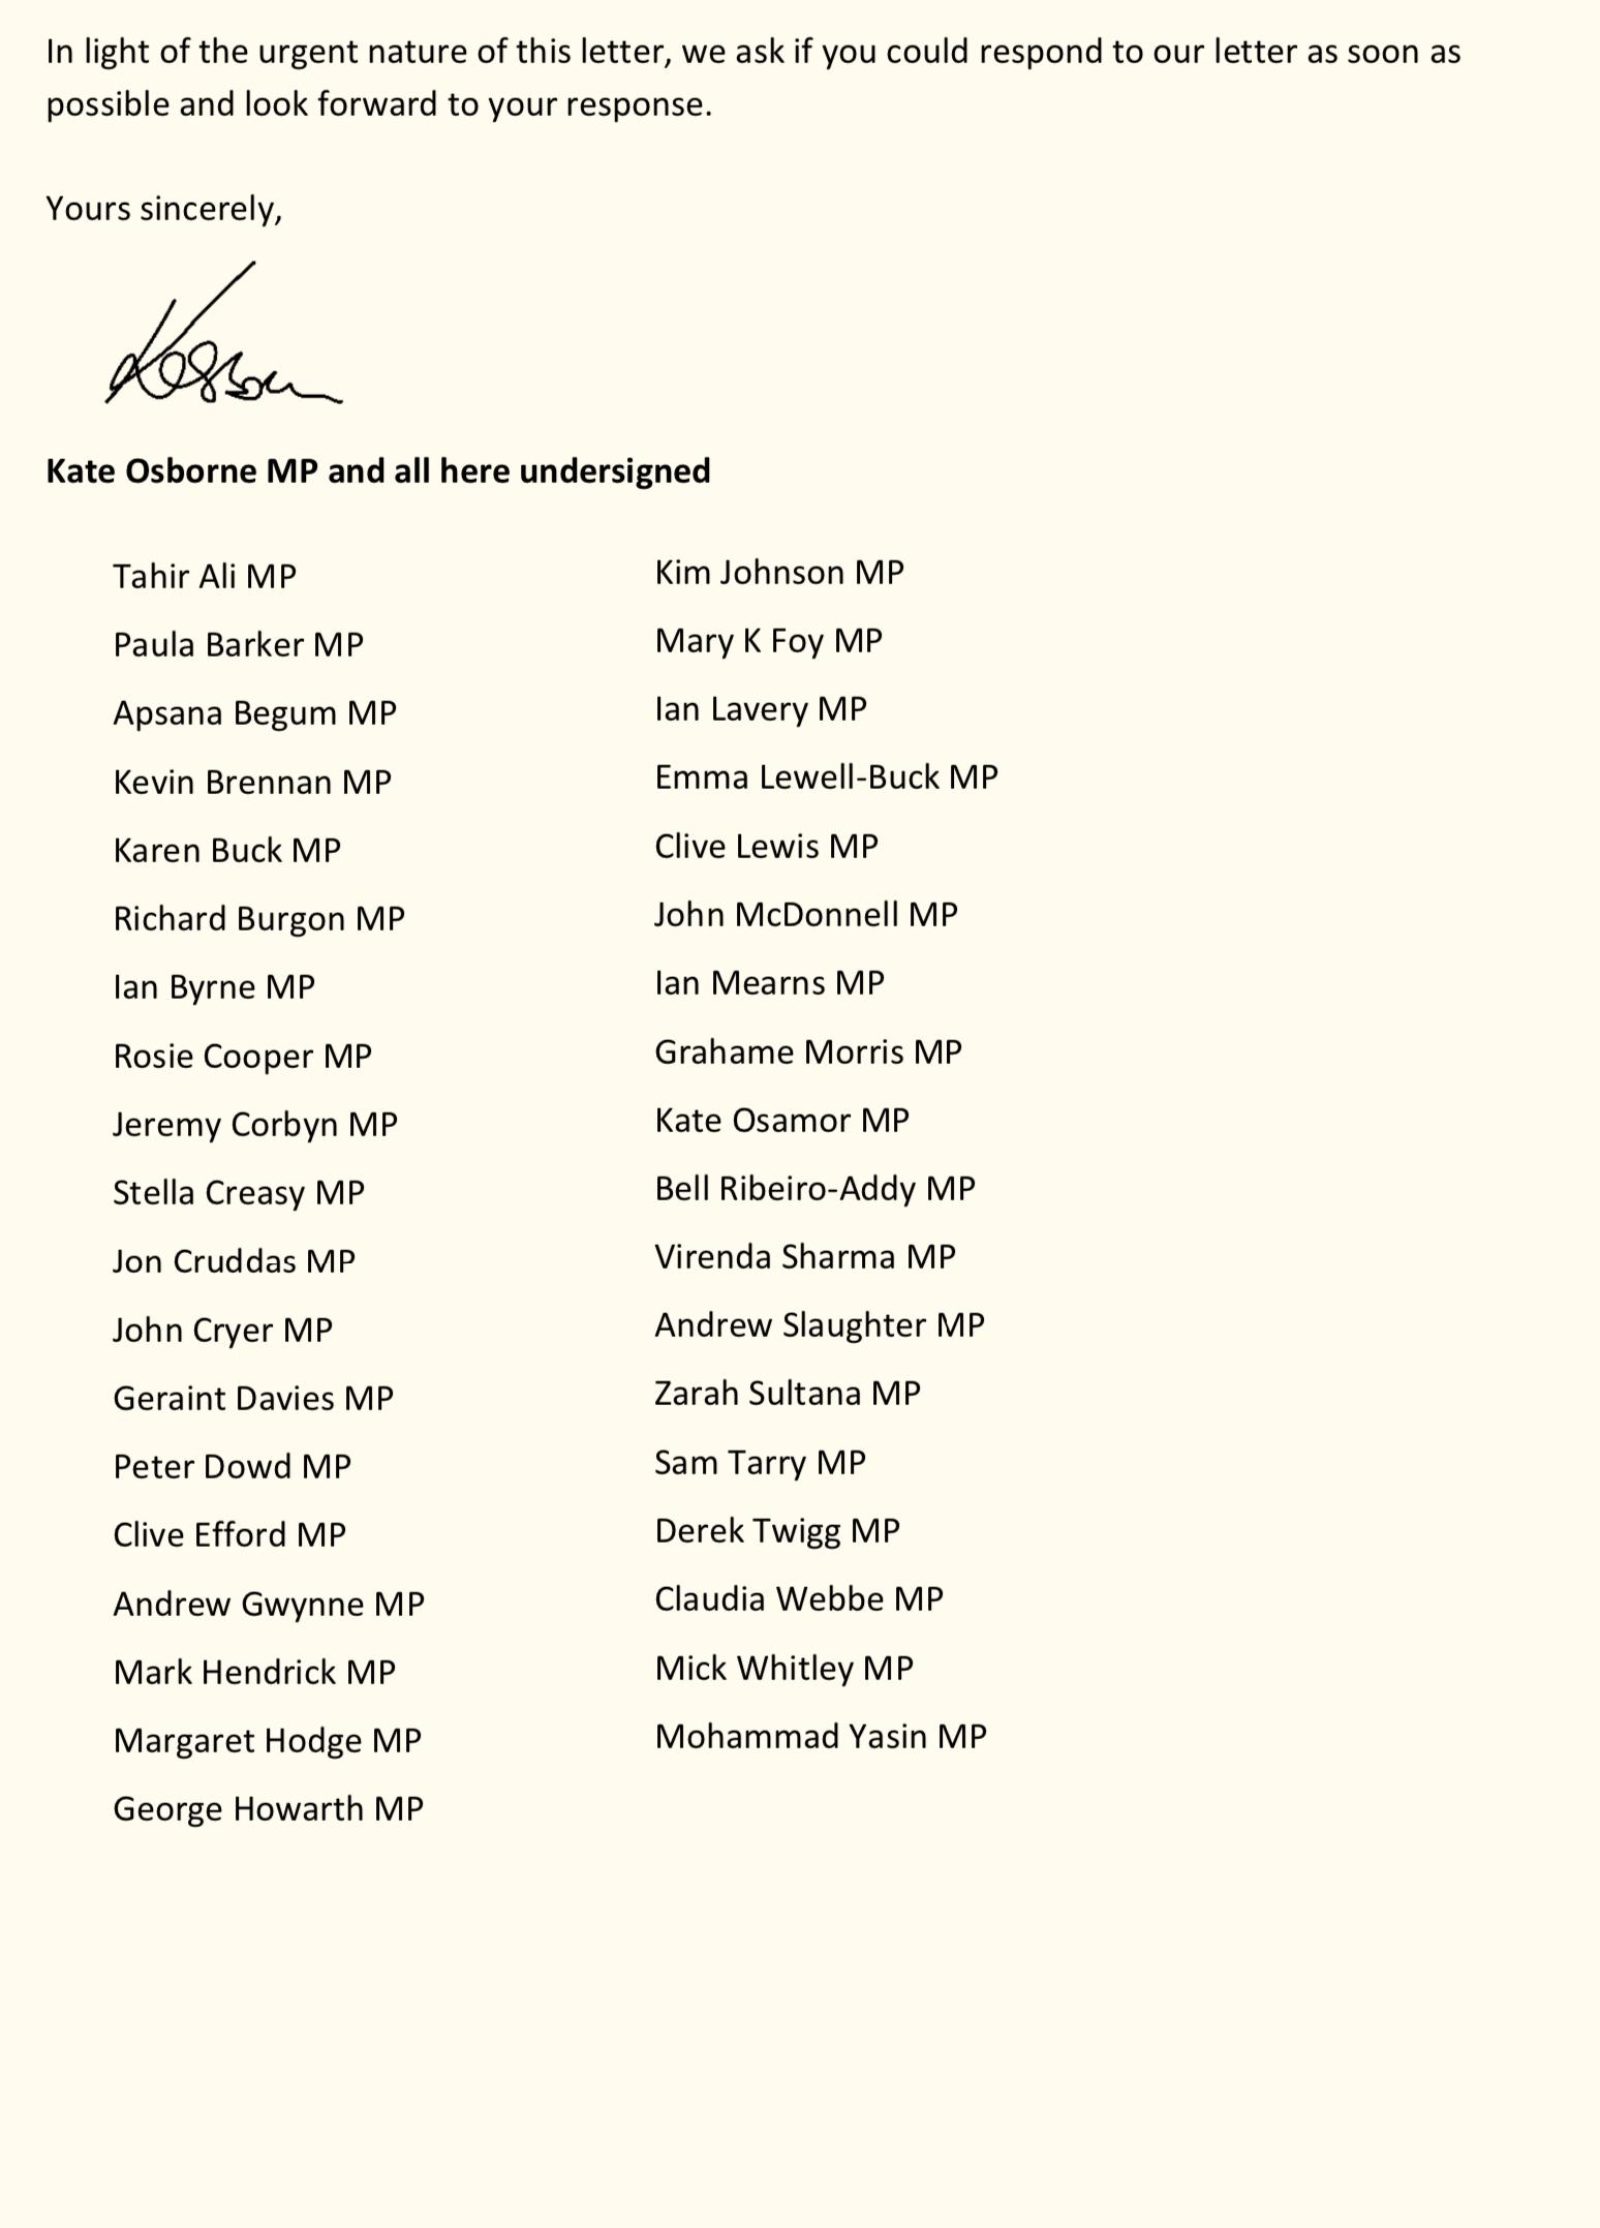 Letter to BA signed by 37 MPs